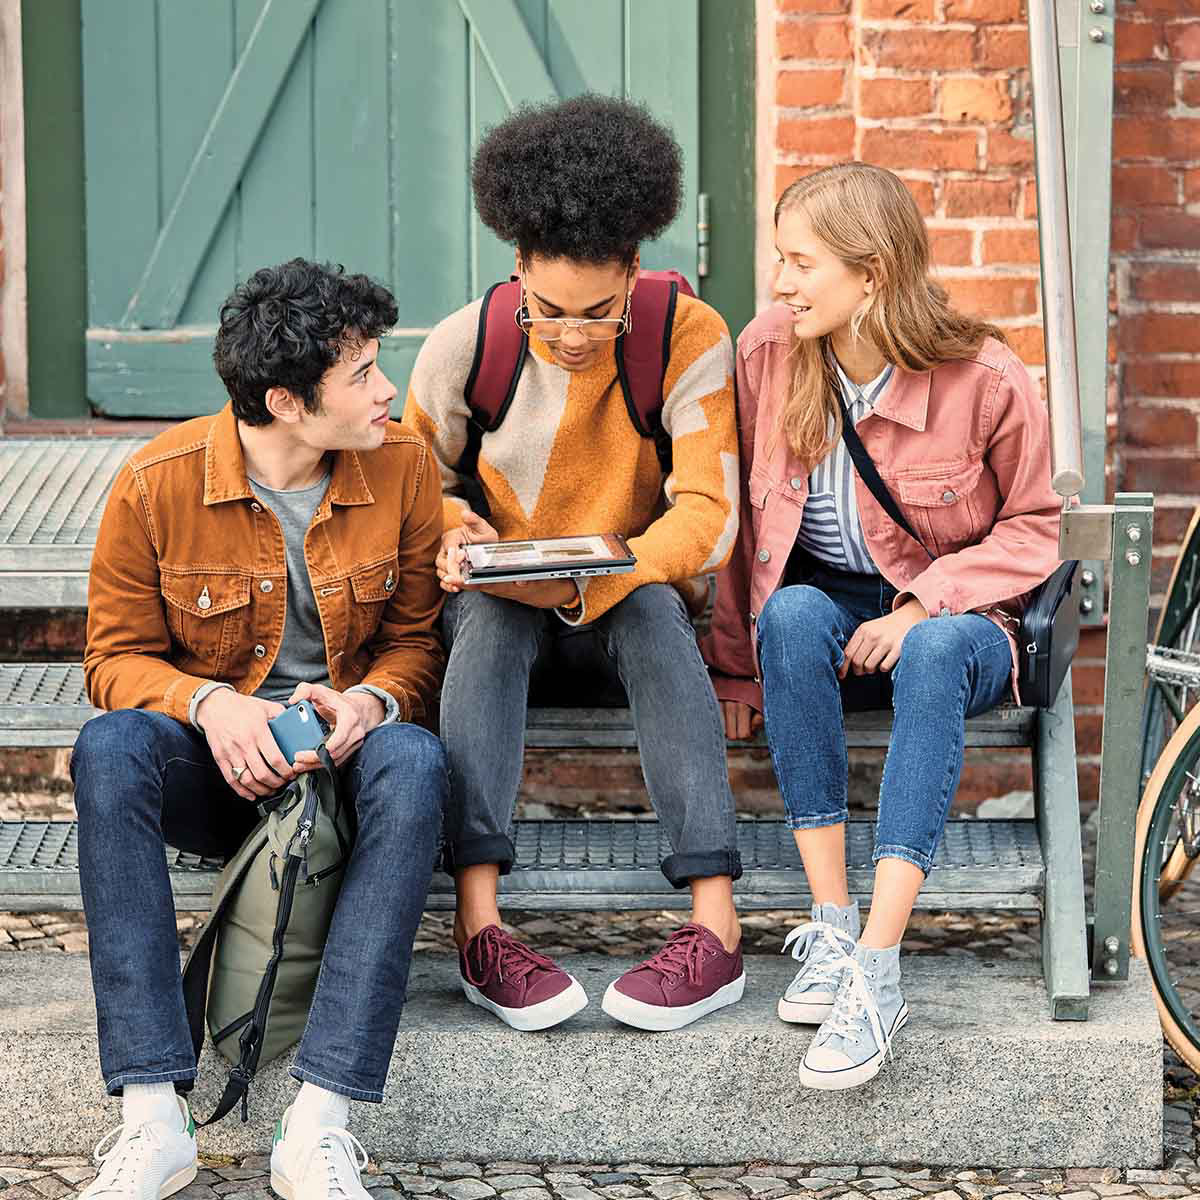 Three young people viewing a tablet device whilst sitting on steps